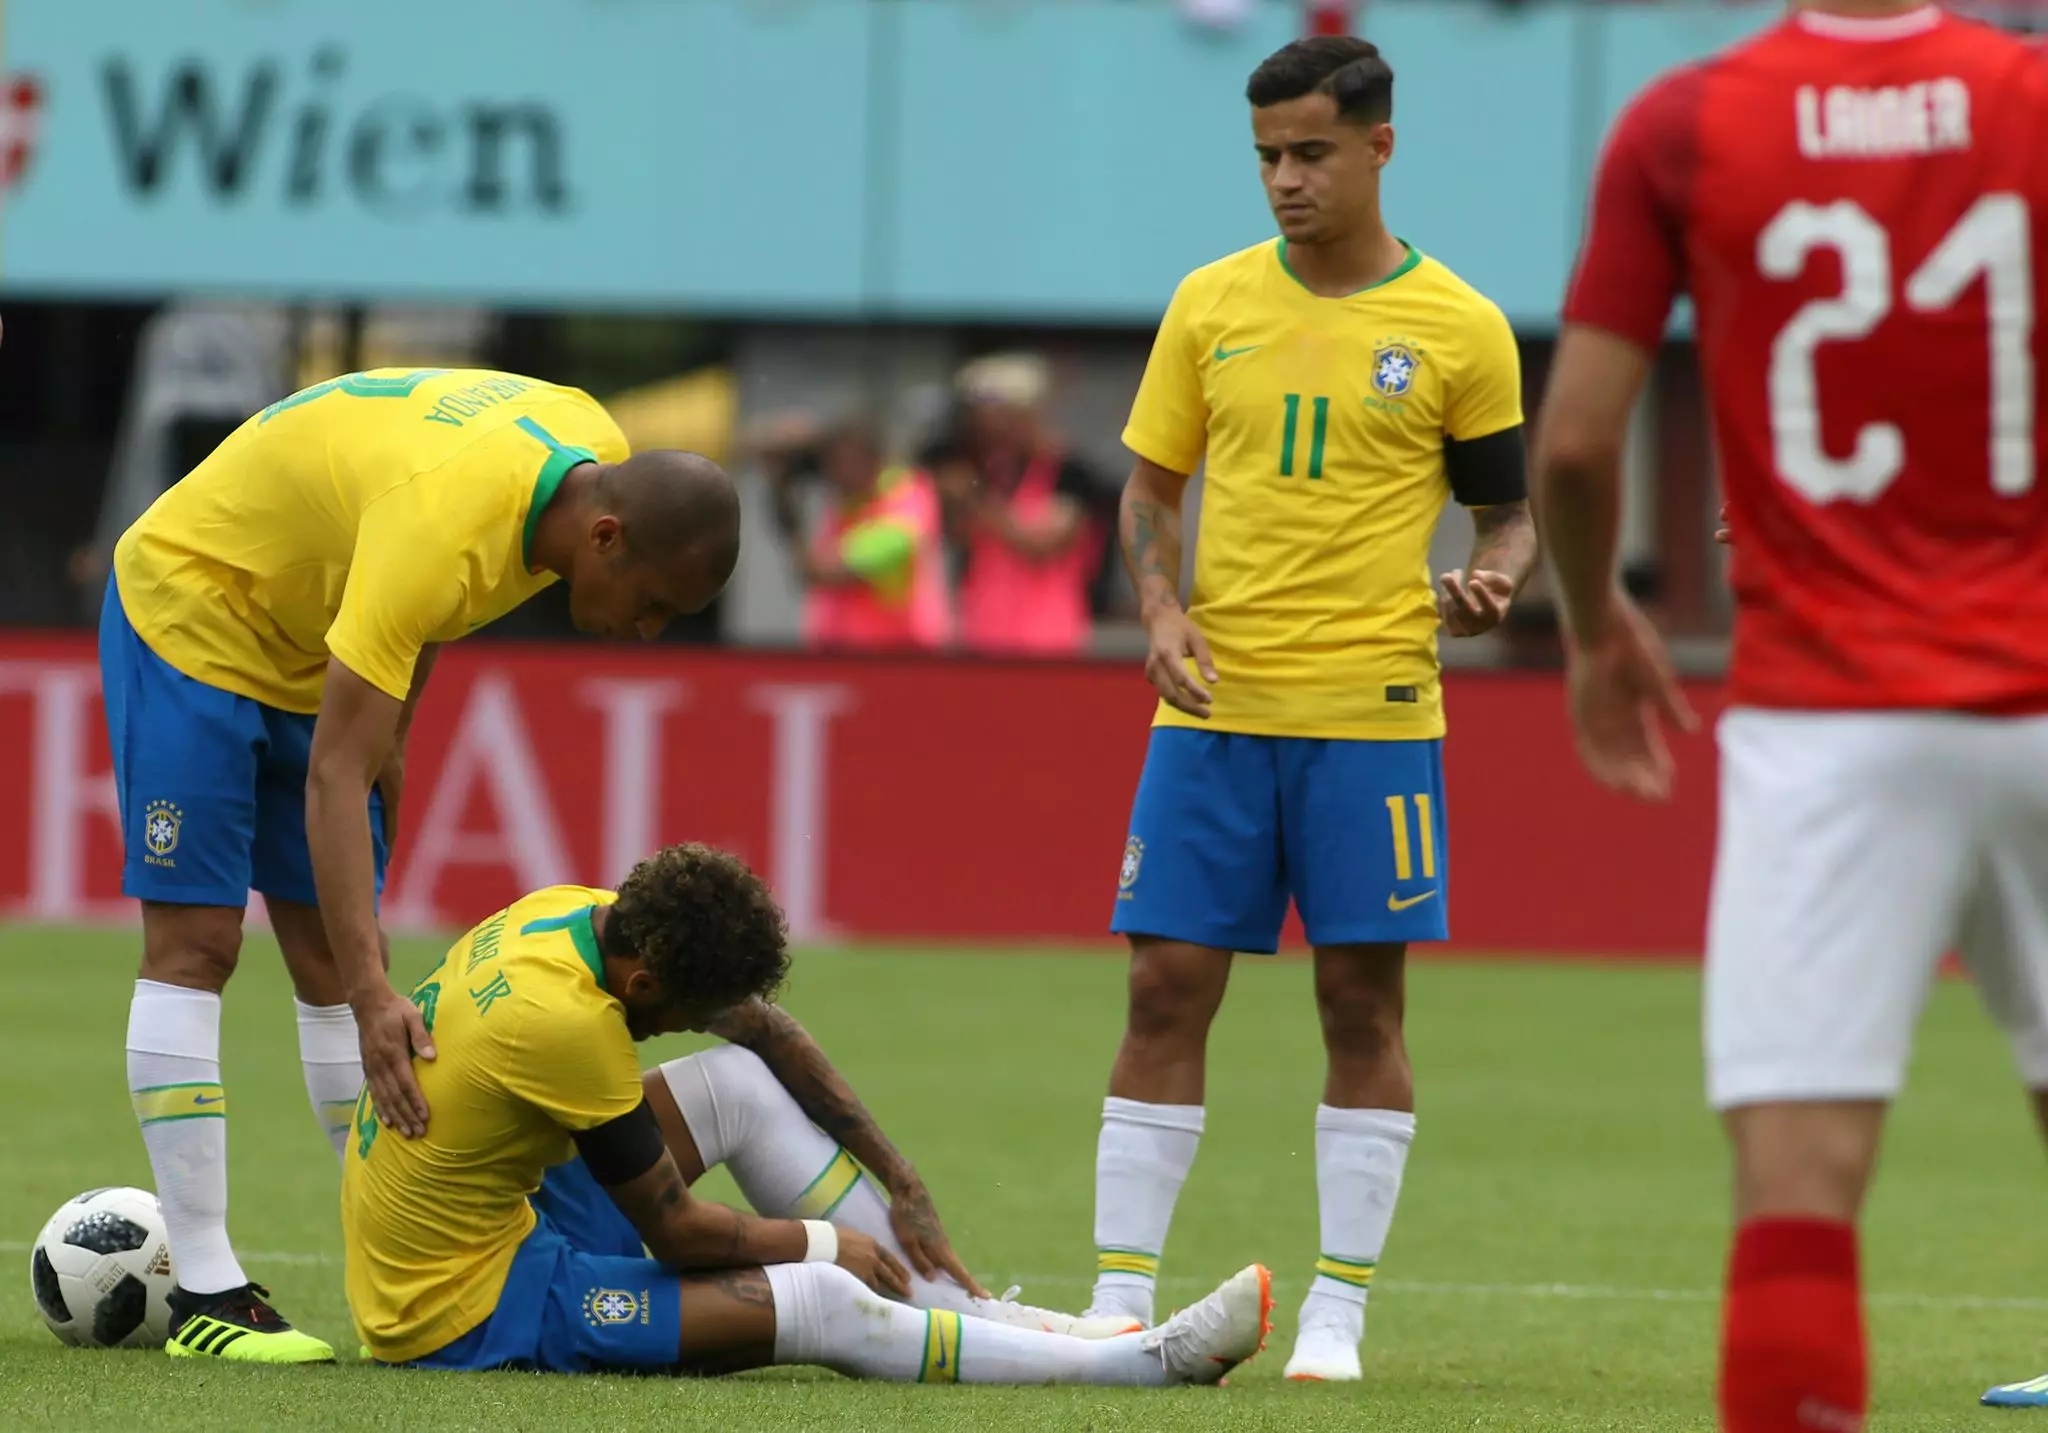 More pain for Neymar. Image: PA